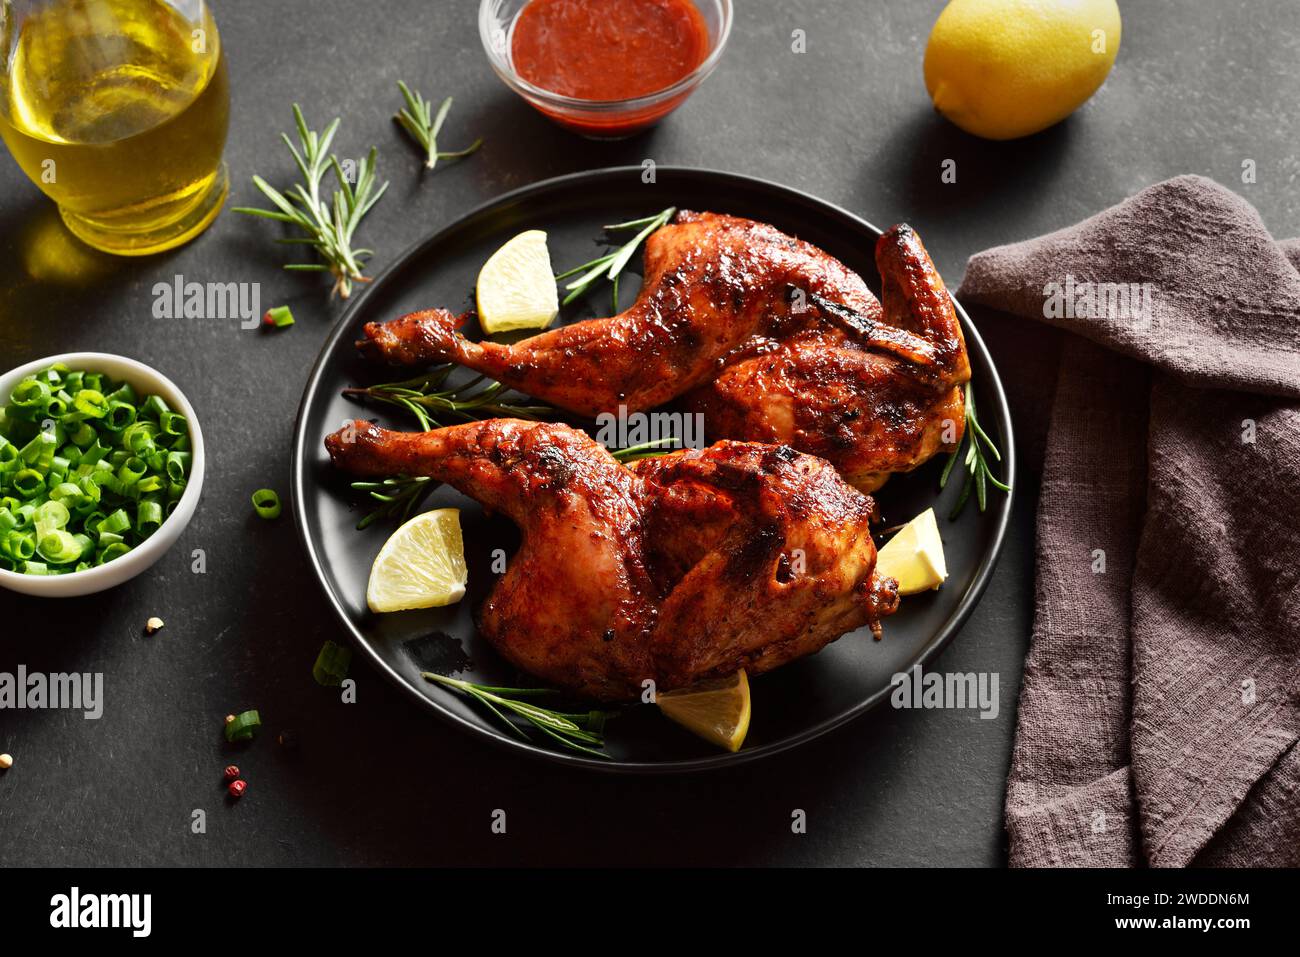 Grilled half chicken with lemon and rosemary on black plate over dark stone background. Tasty roasted chicken meat for dinner. Close up view Stock Photo